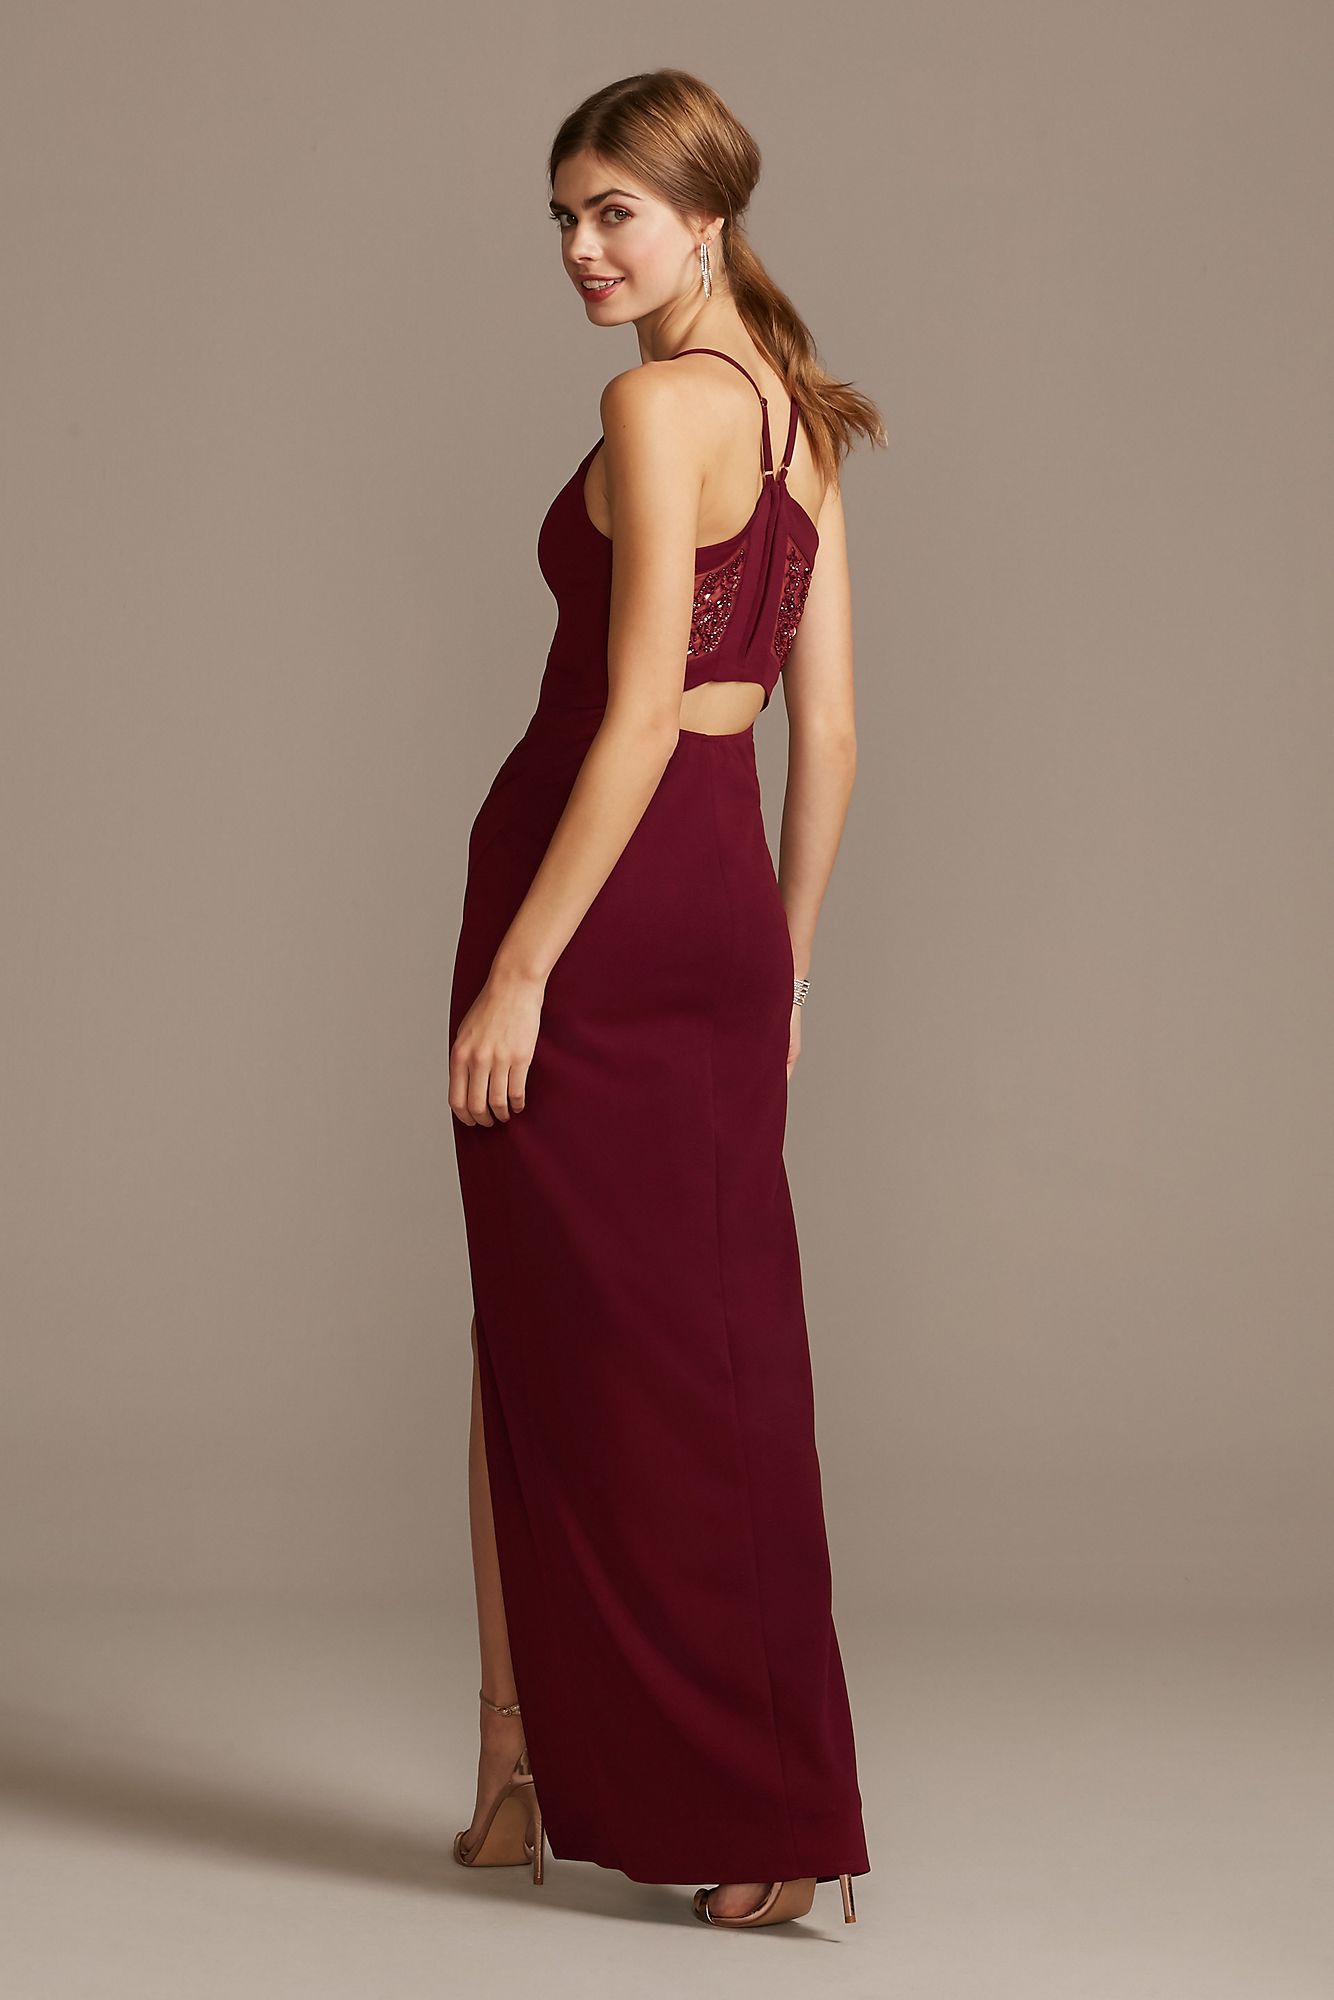 Plunging-V Beaded Illusion Back ABL3405318 Gown with Slit